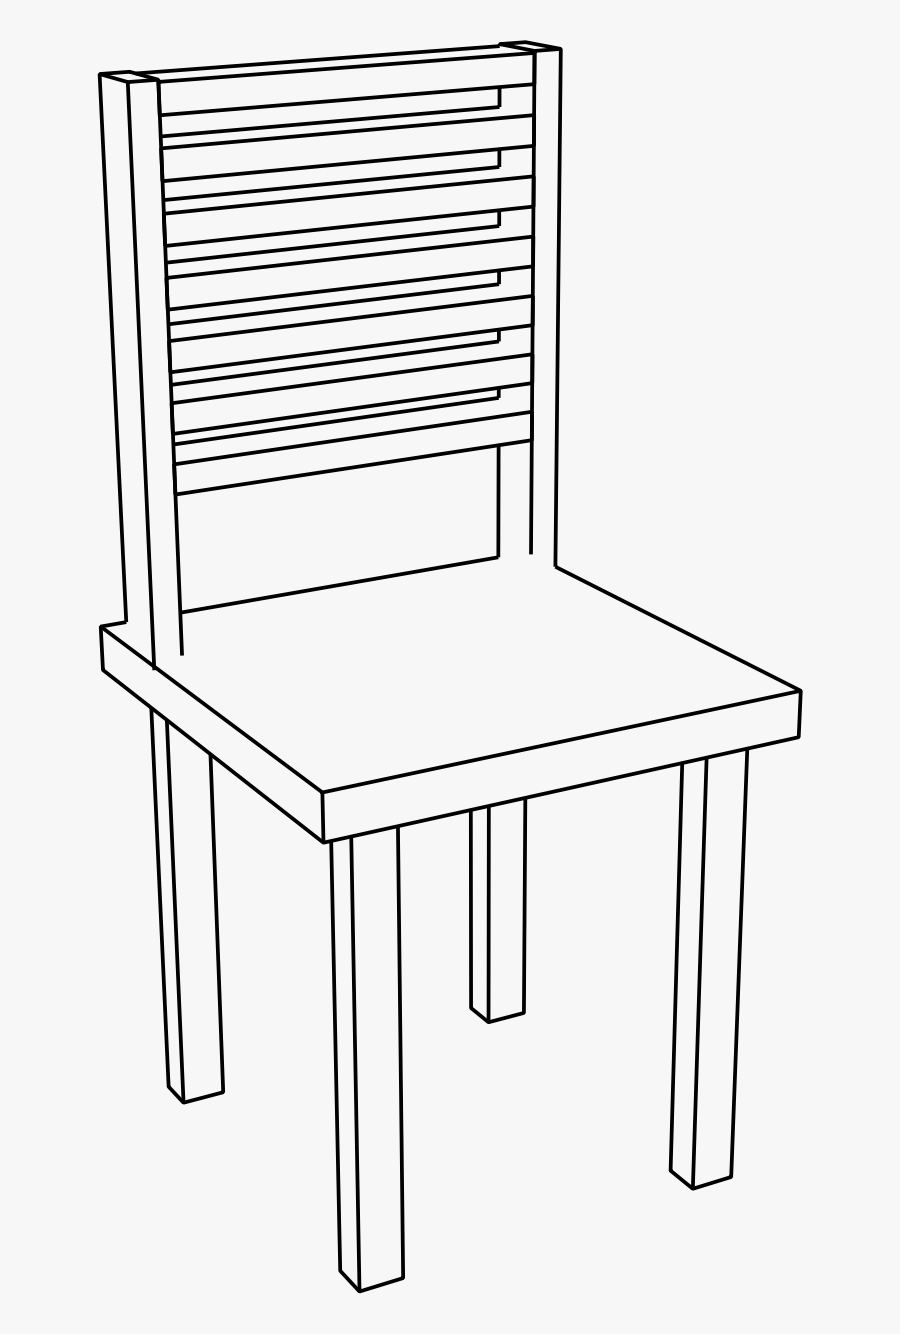 Chair Clipart Basic - Chair Png Black And White, Transparent Clipart